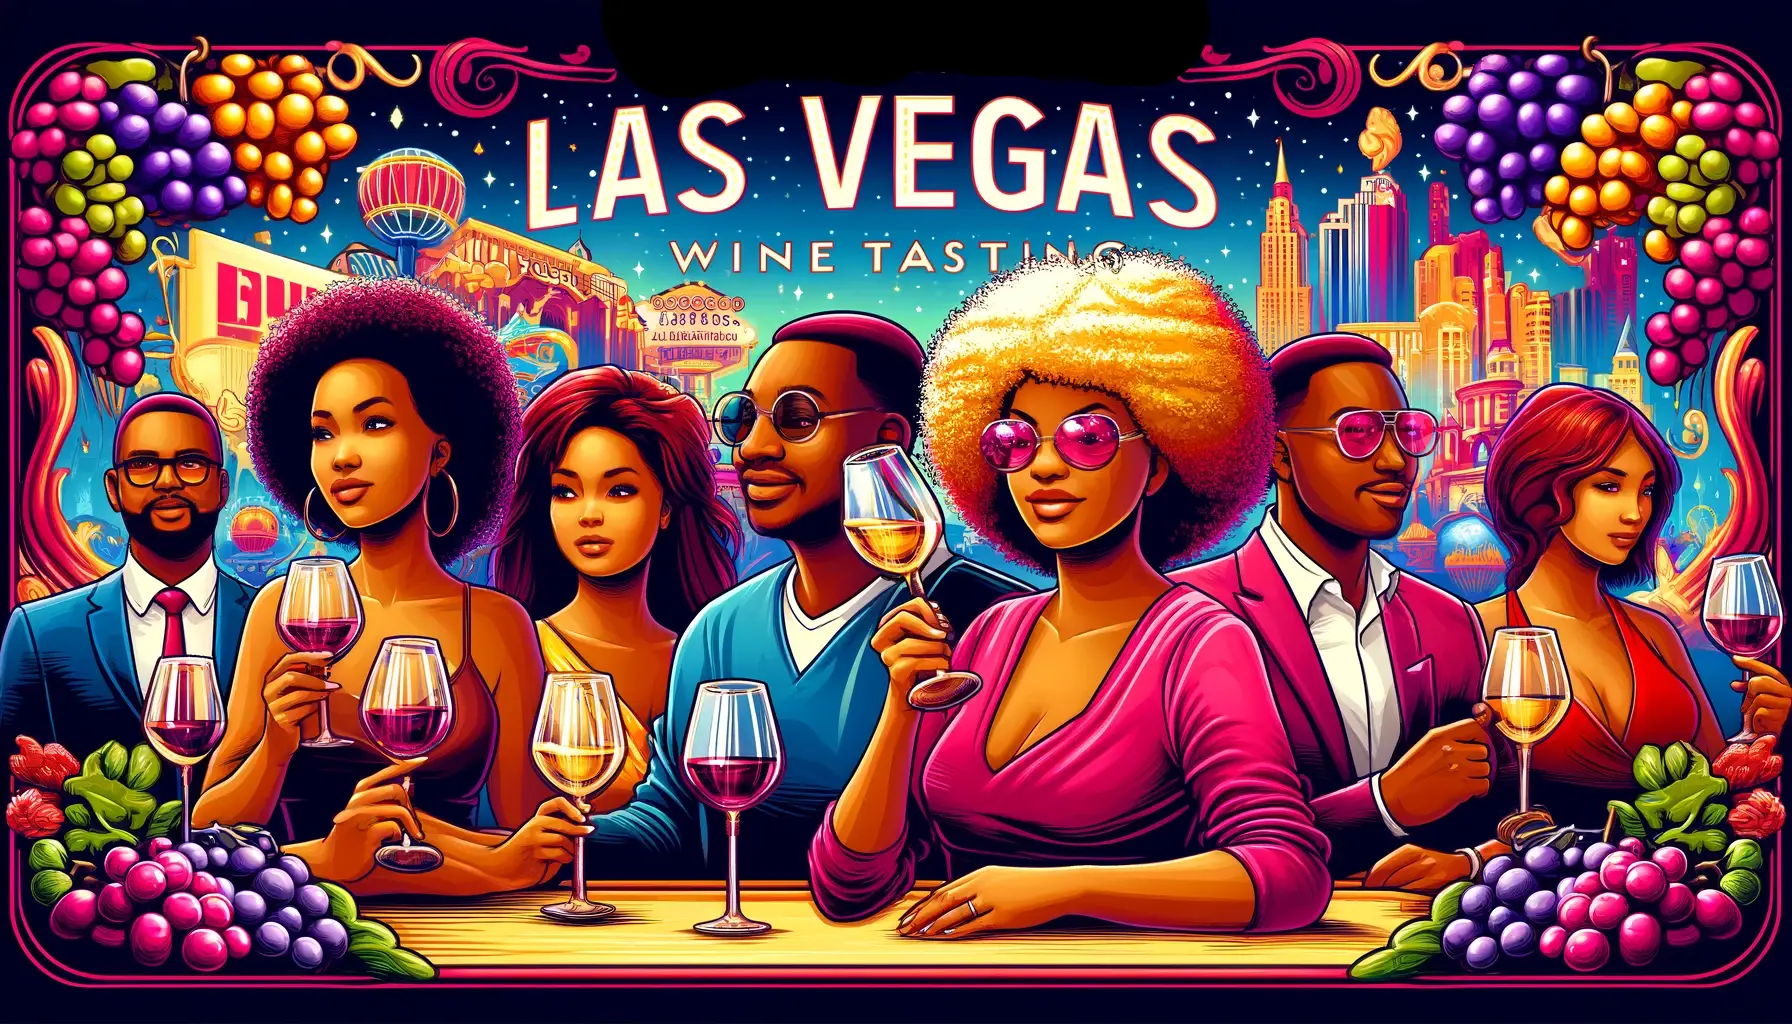 ' with a realistic portrayal of Black Americans enjoying wine tasting in the backdrop